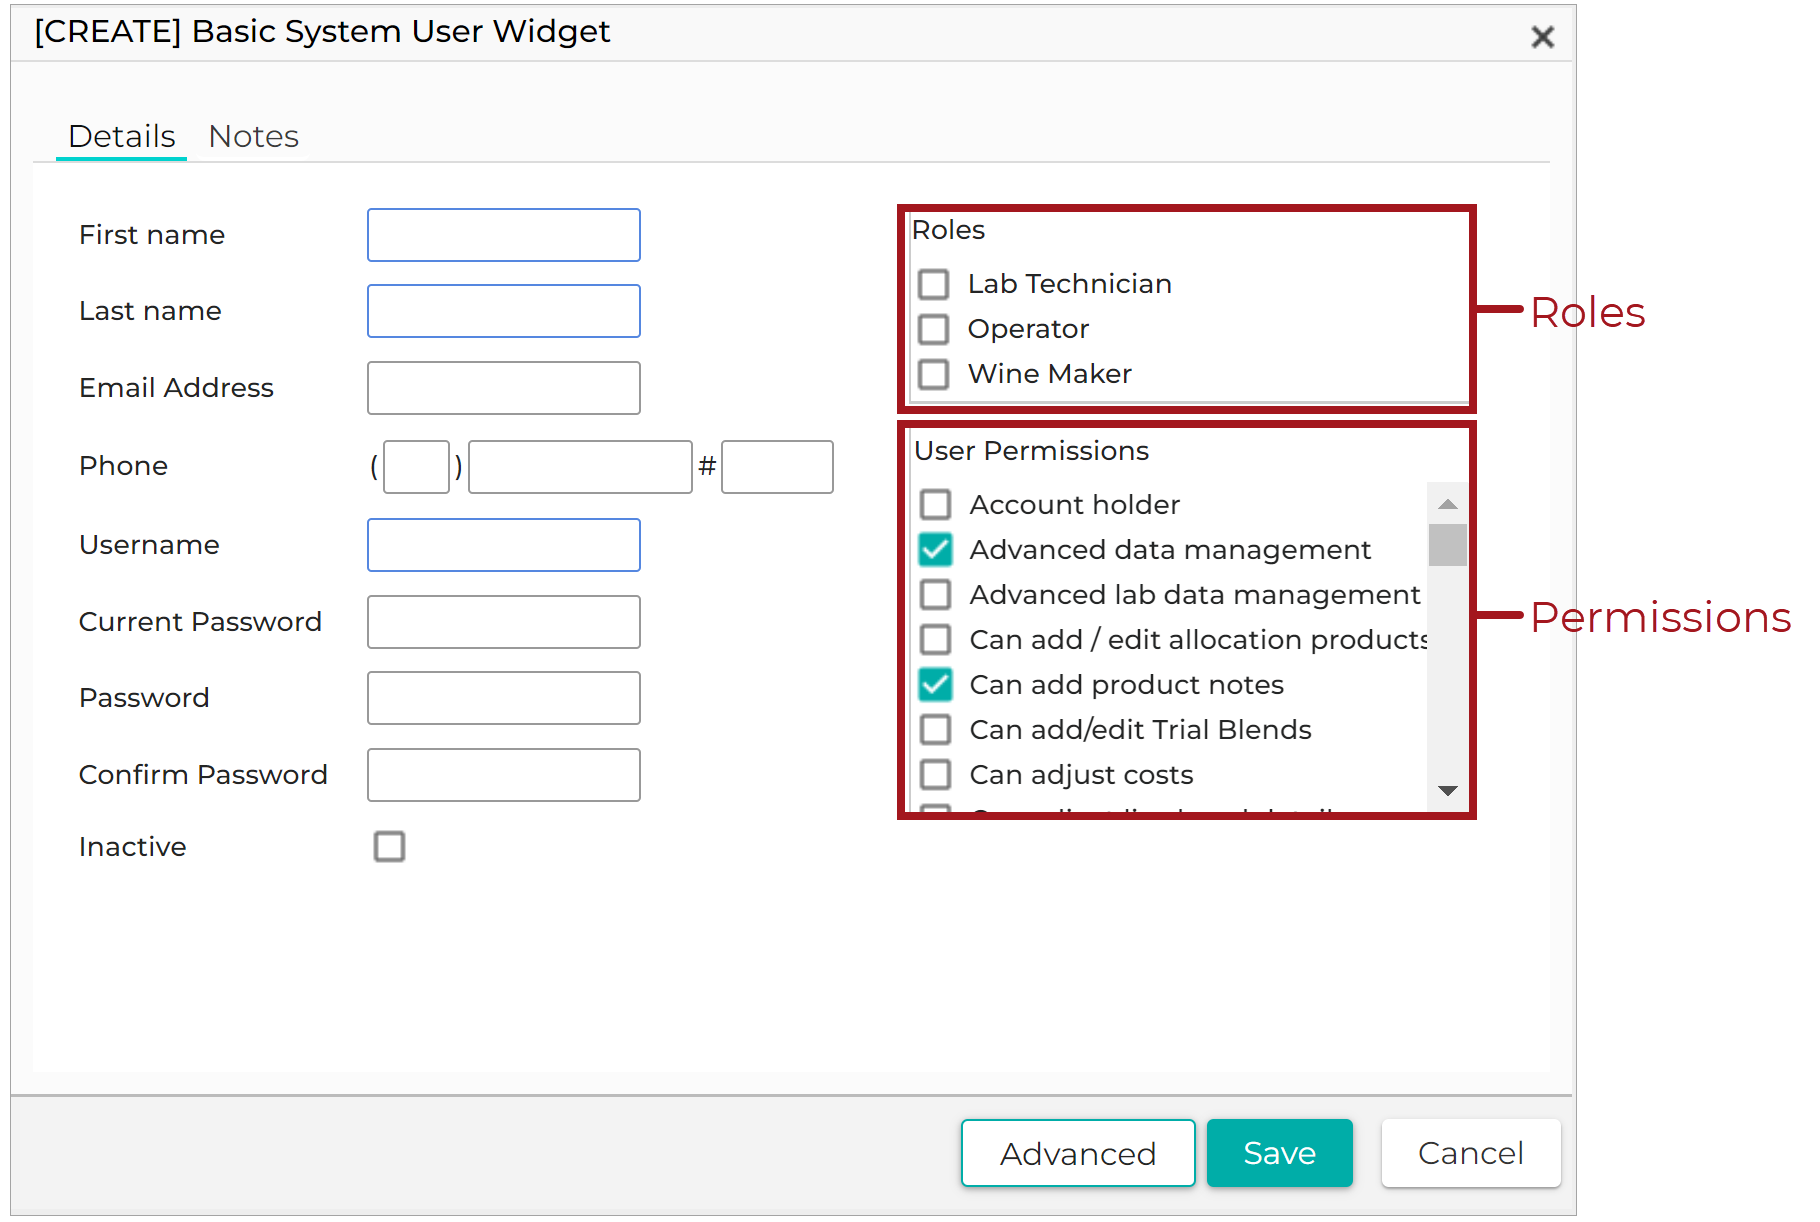 Create_Basic_System_User_Widget_-_Roles_and_Permissions_20220209.png